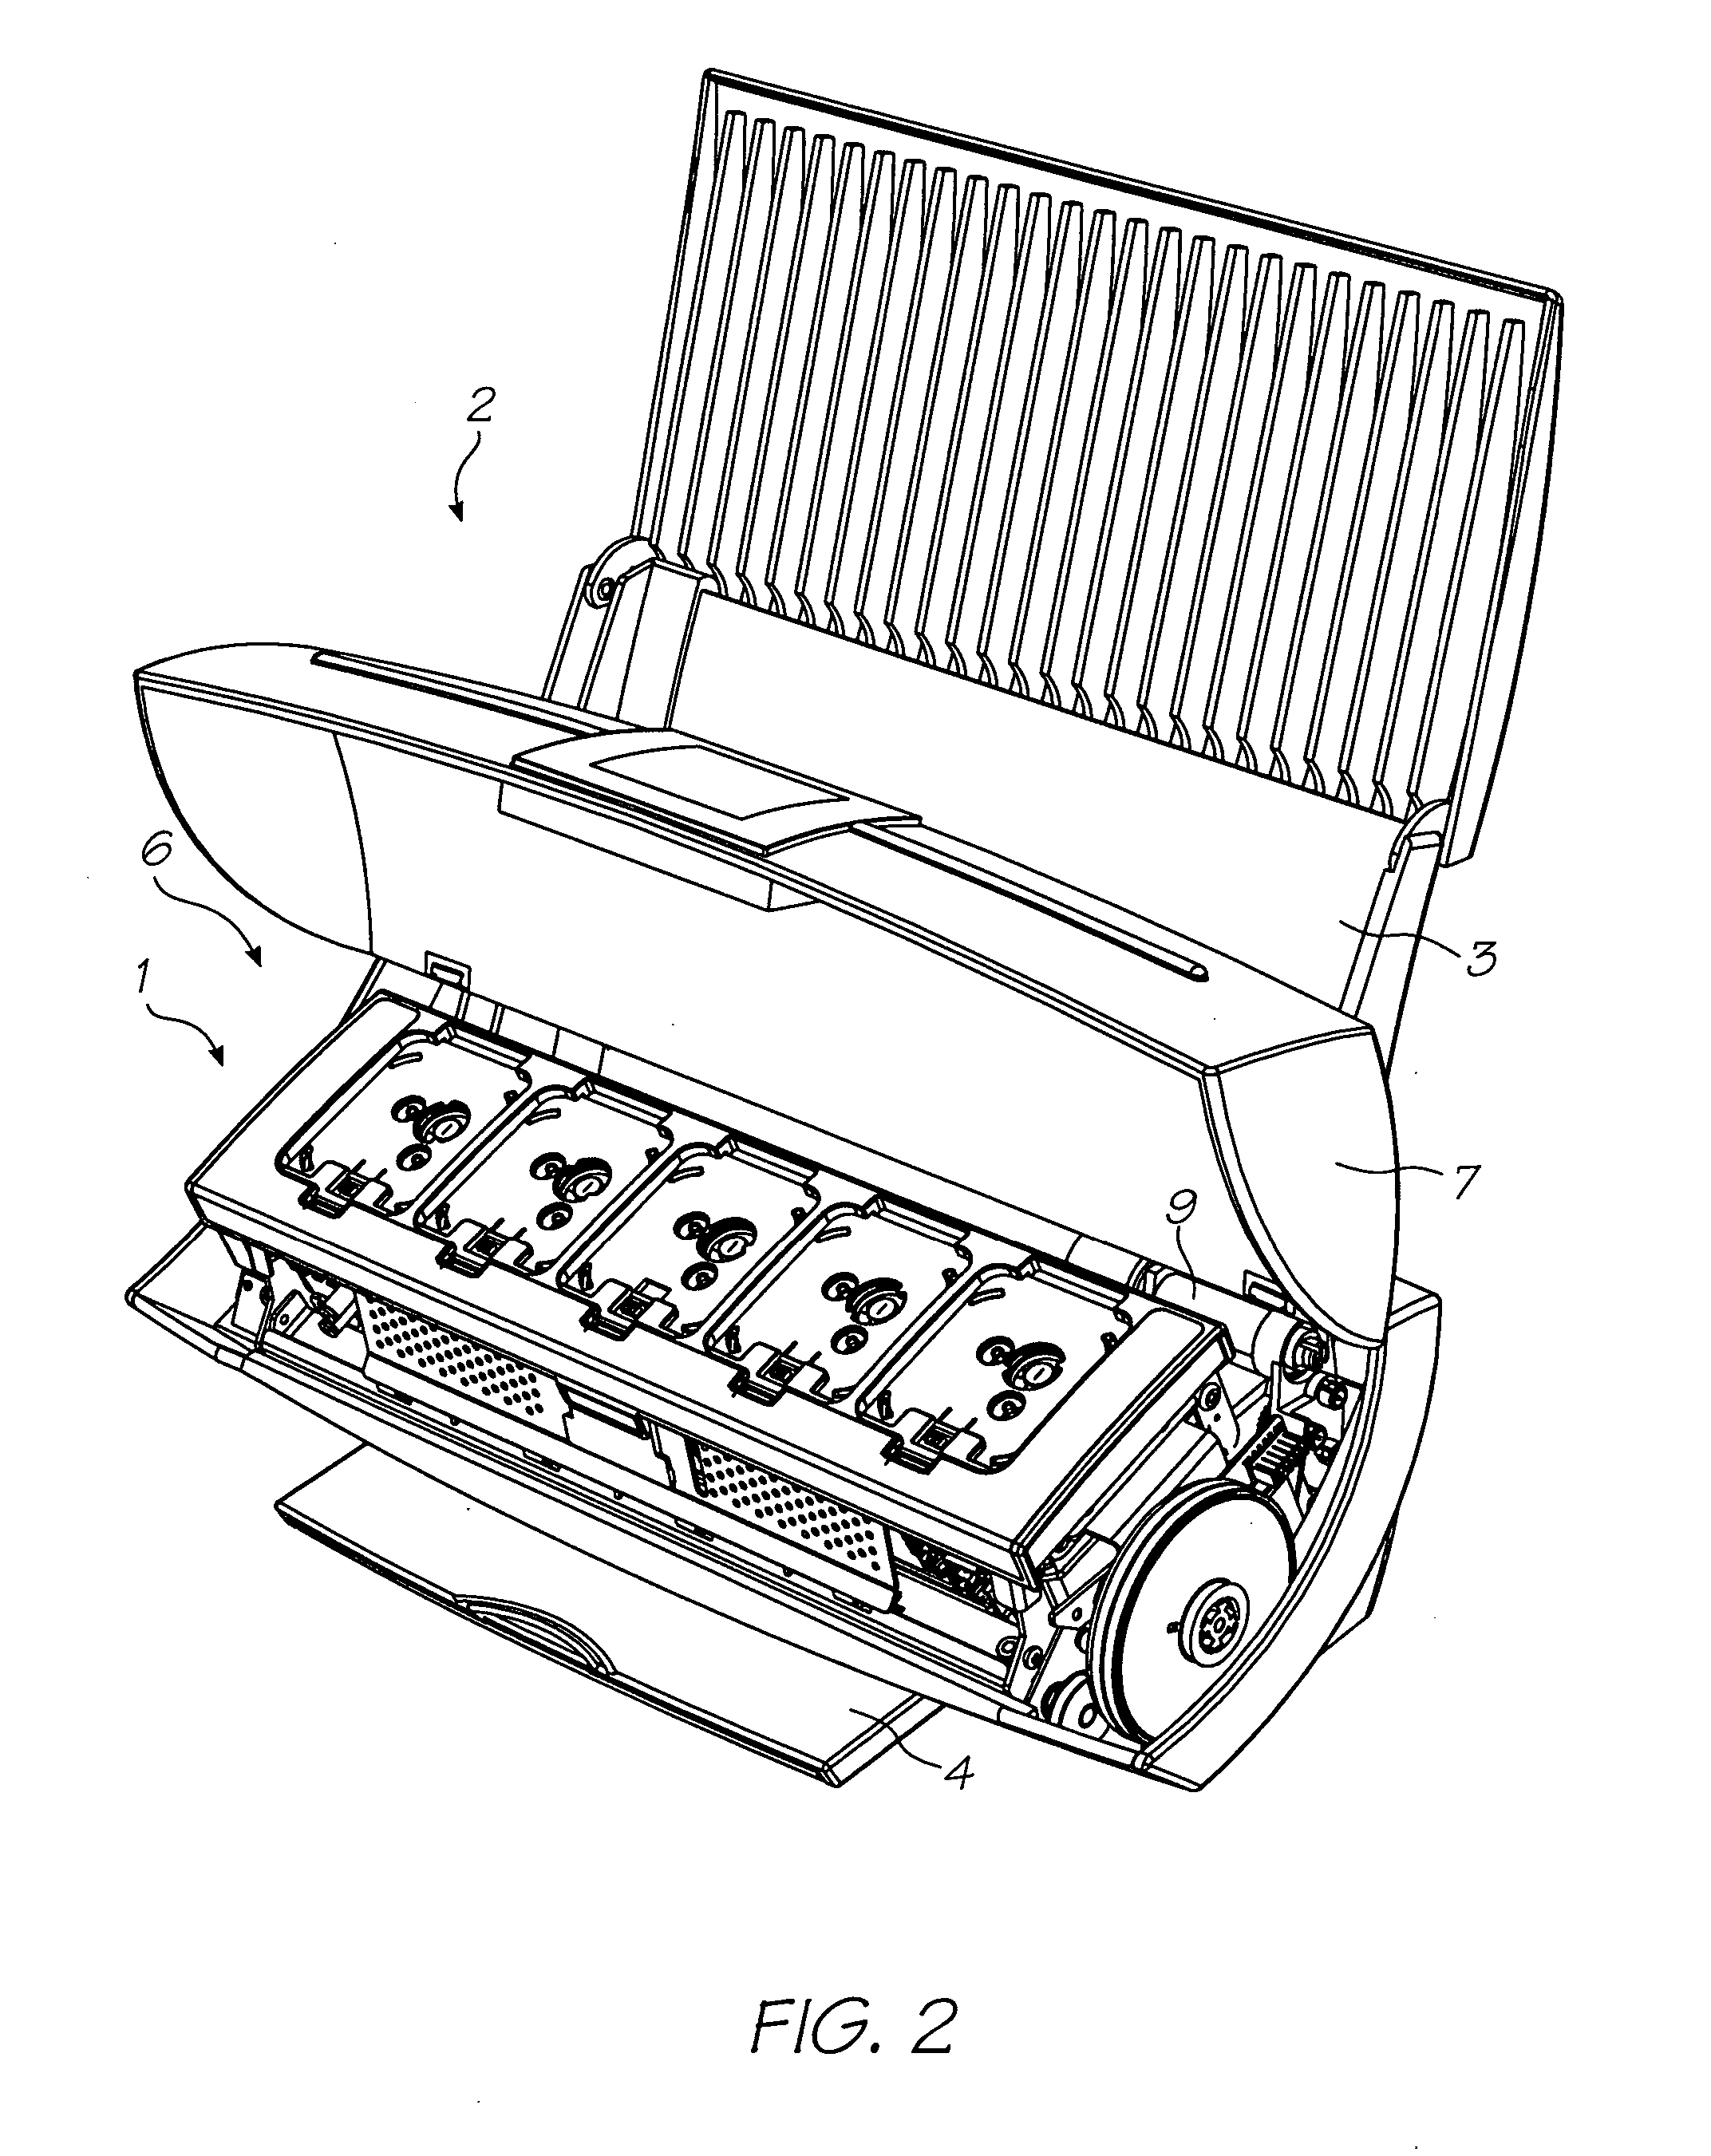 Inkjet printhead with integrated circuit mounted on polymer sealing film